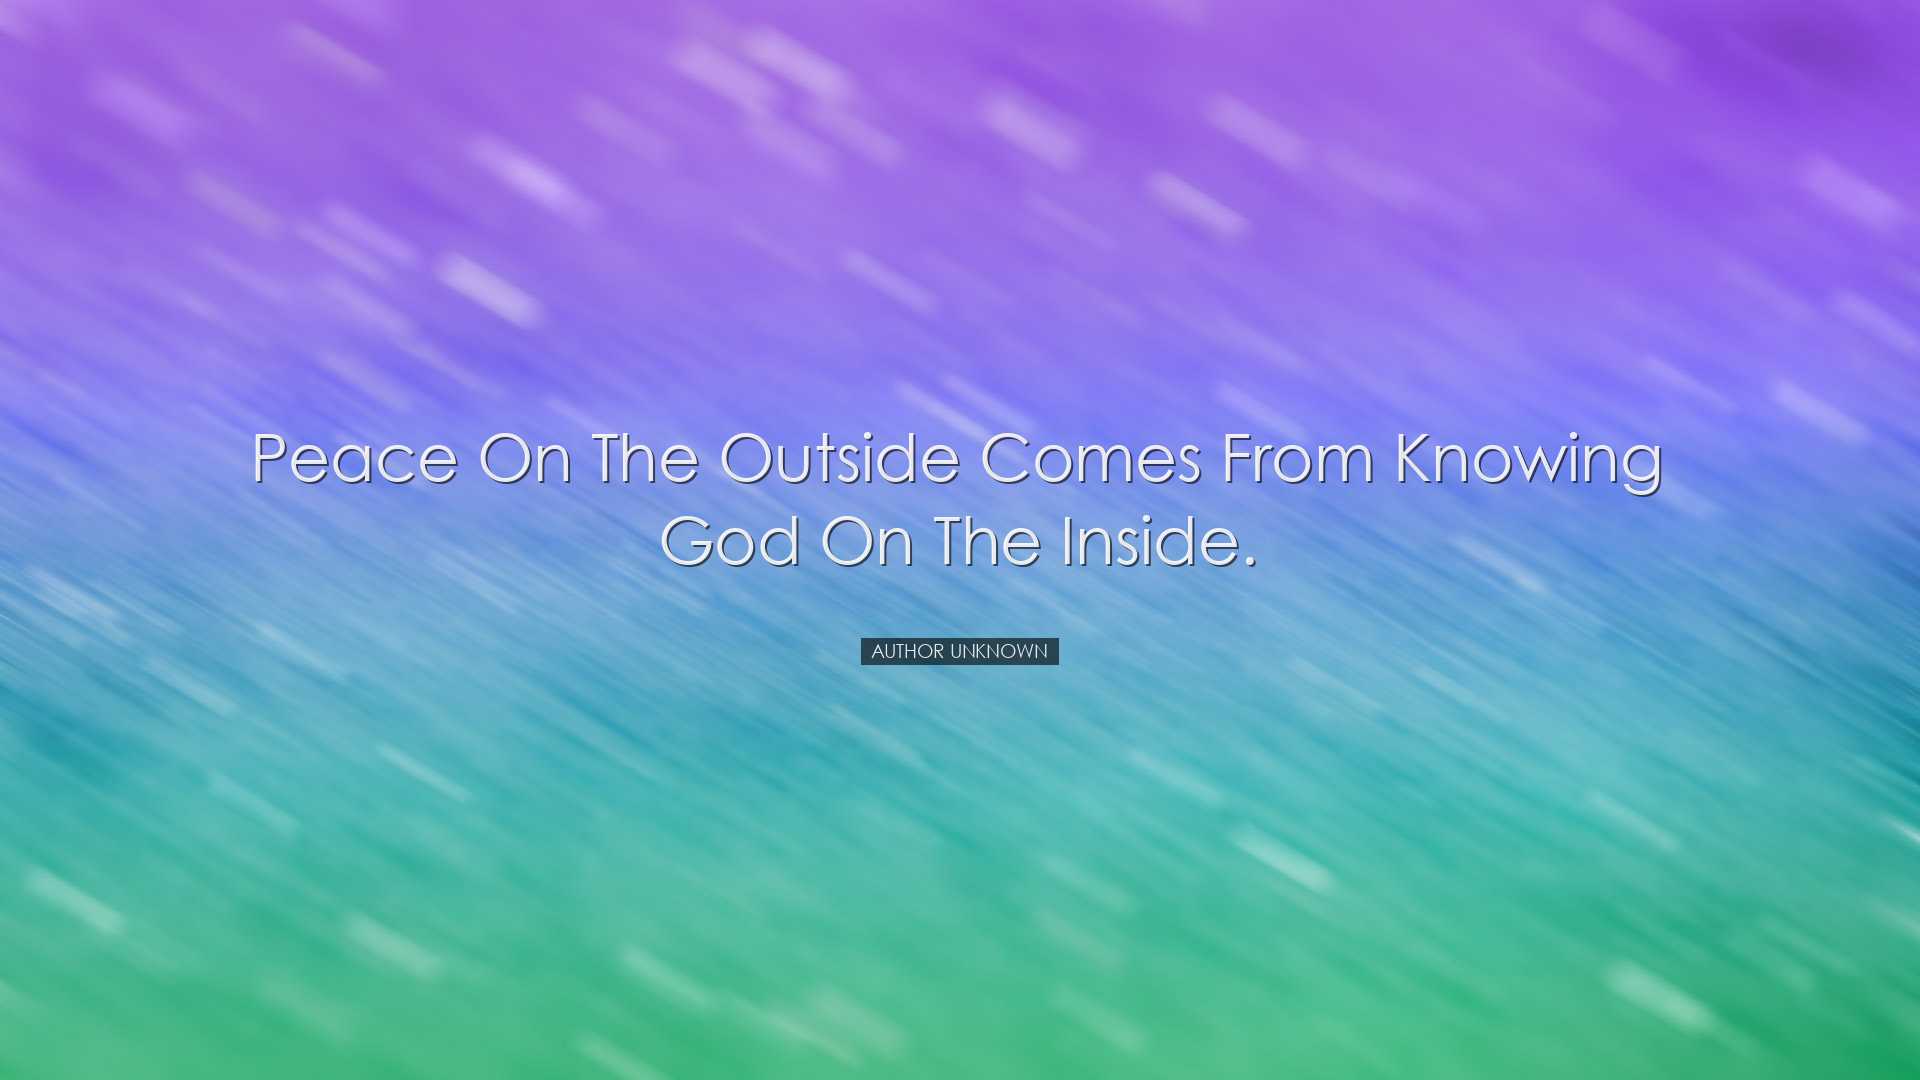 Peace on the outside comes from knowing God on the inside. - Autho